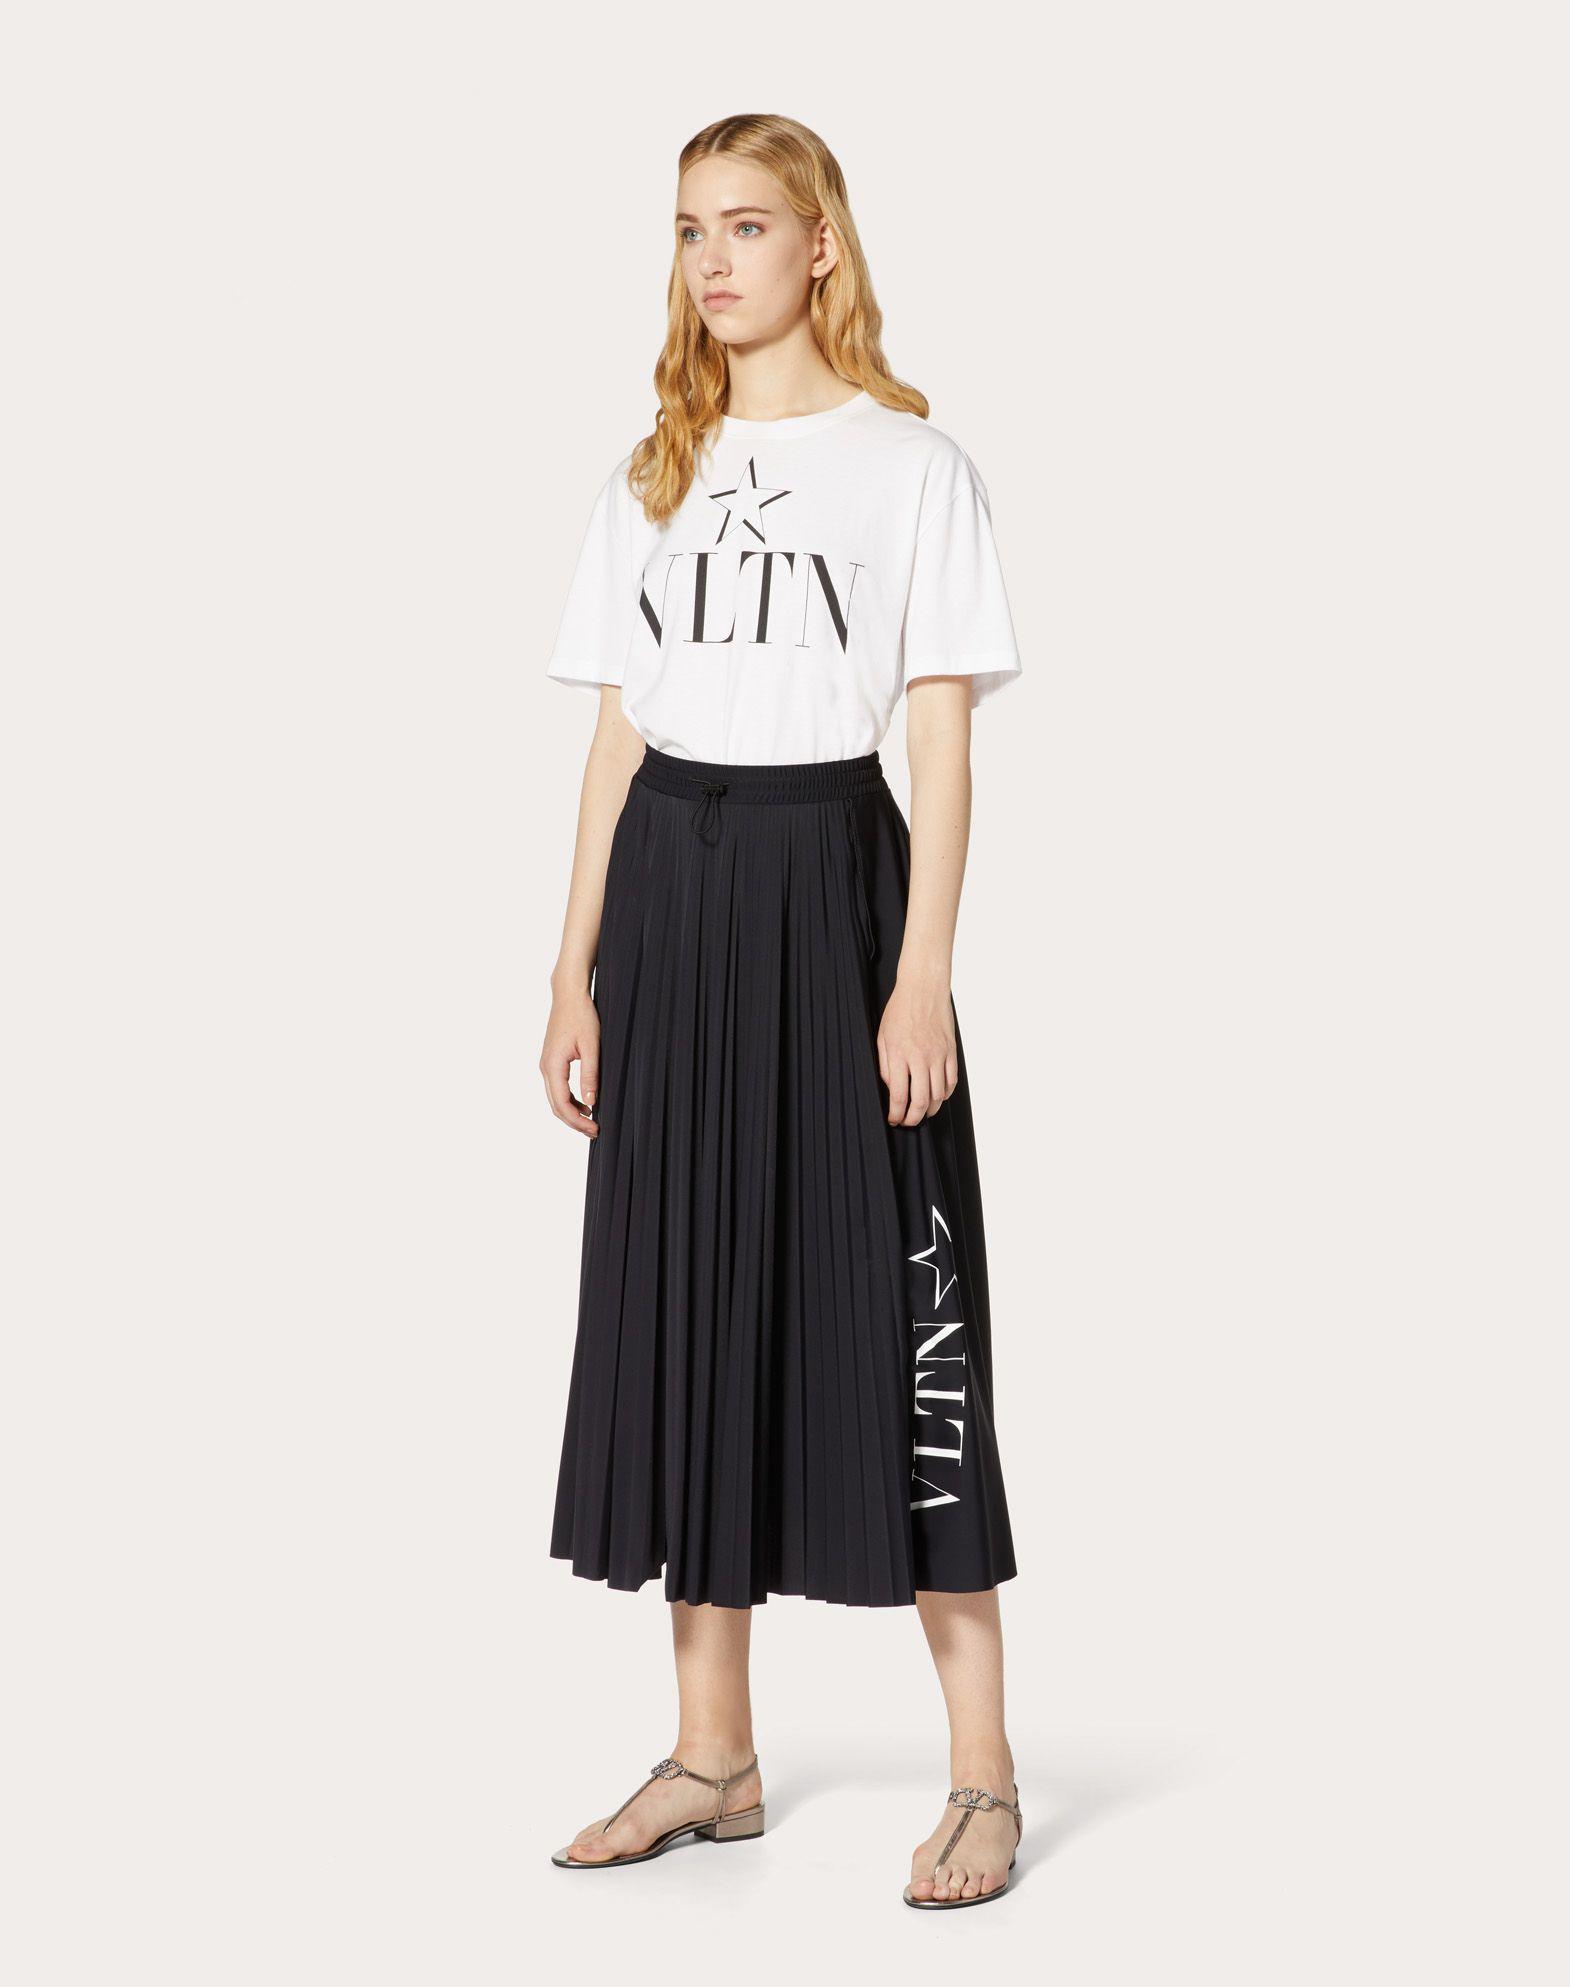 Valentino Pleated Jersey Skirt With Vltnstar Print in Black | Lyst